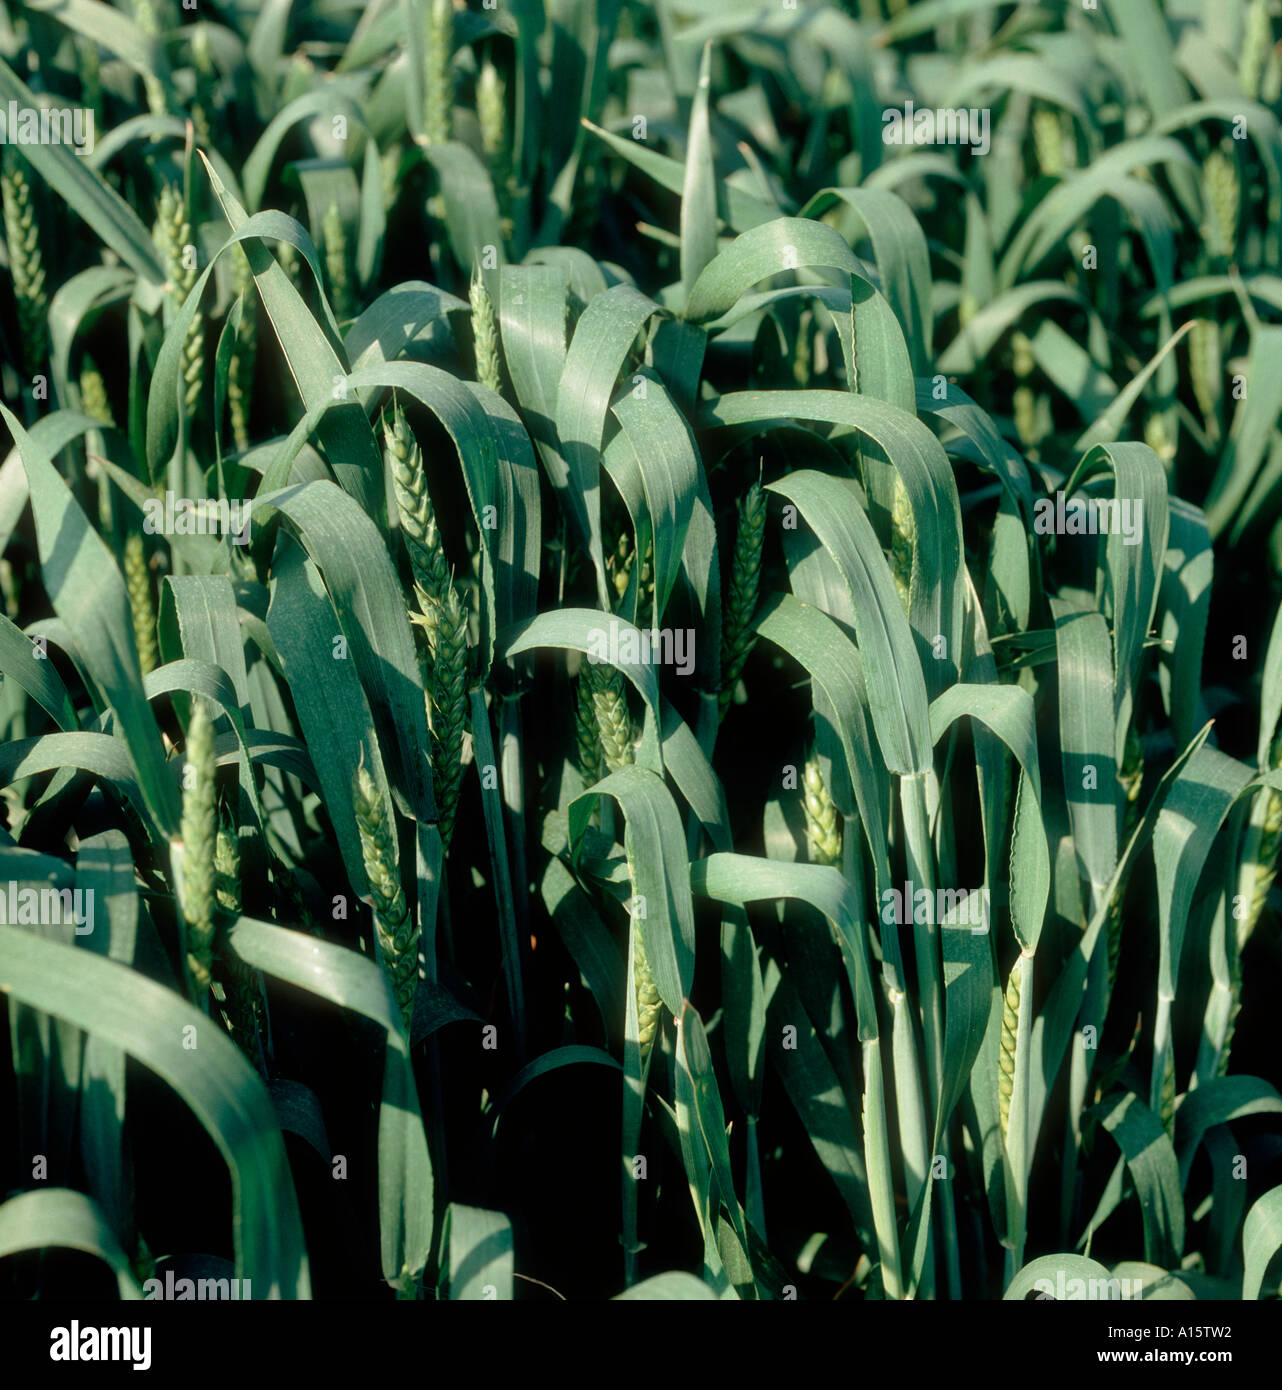 Wheat crop with ear emerging or in boot Stock Photo